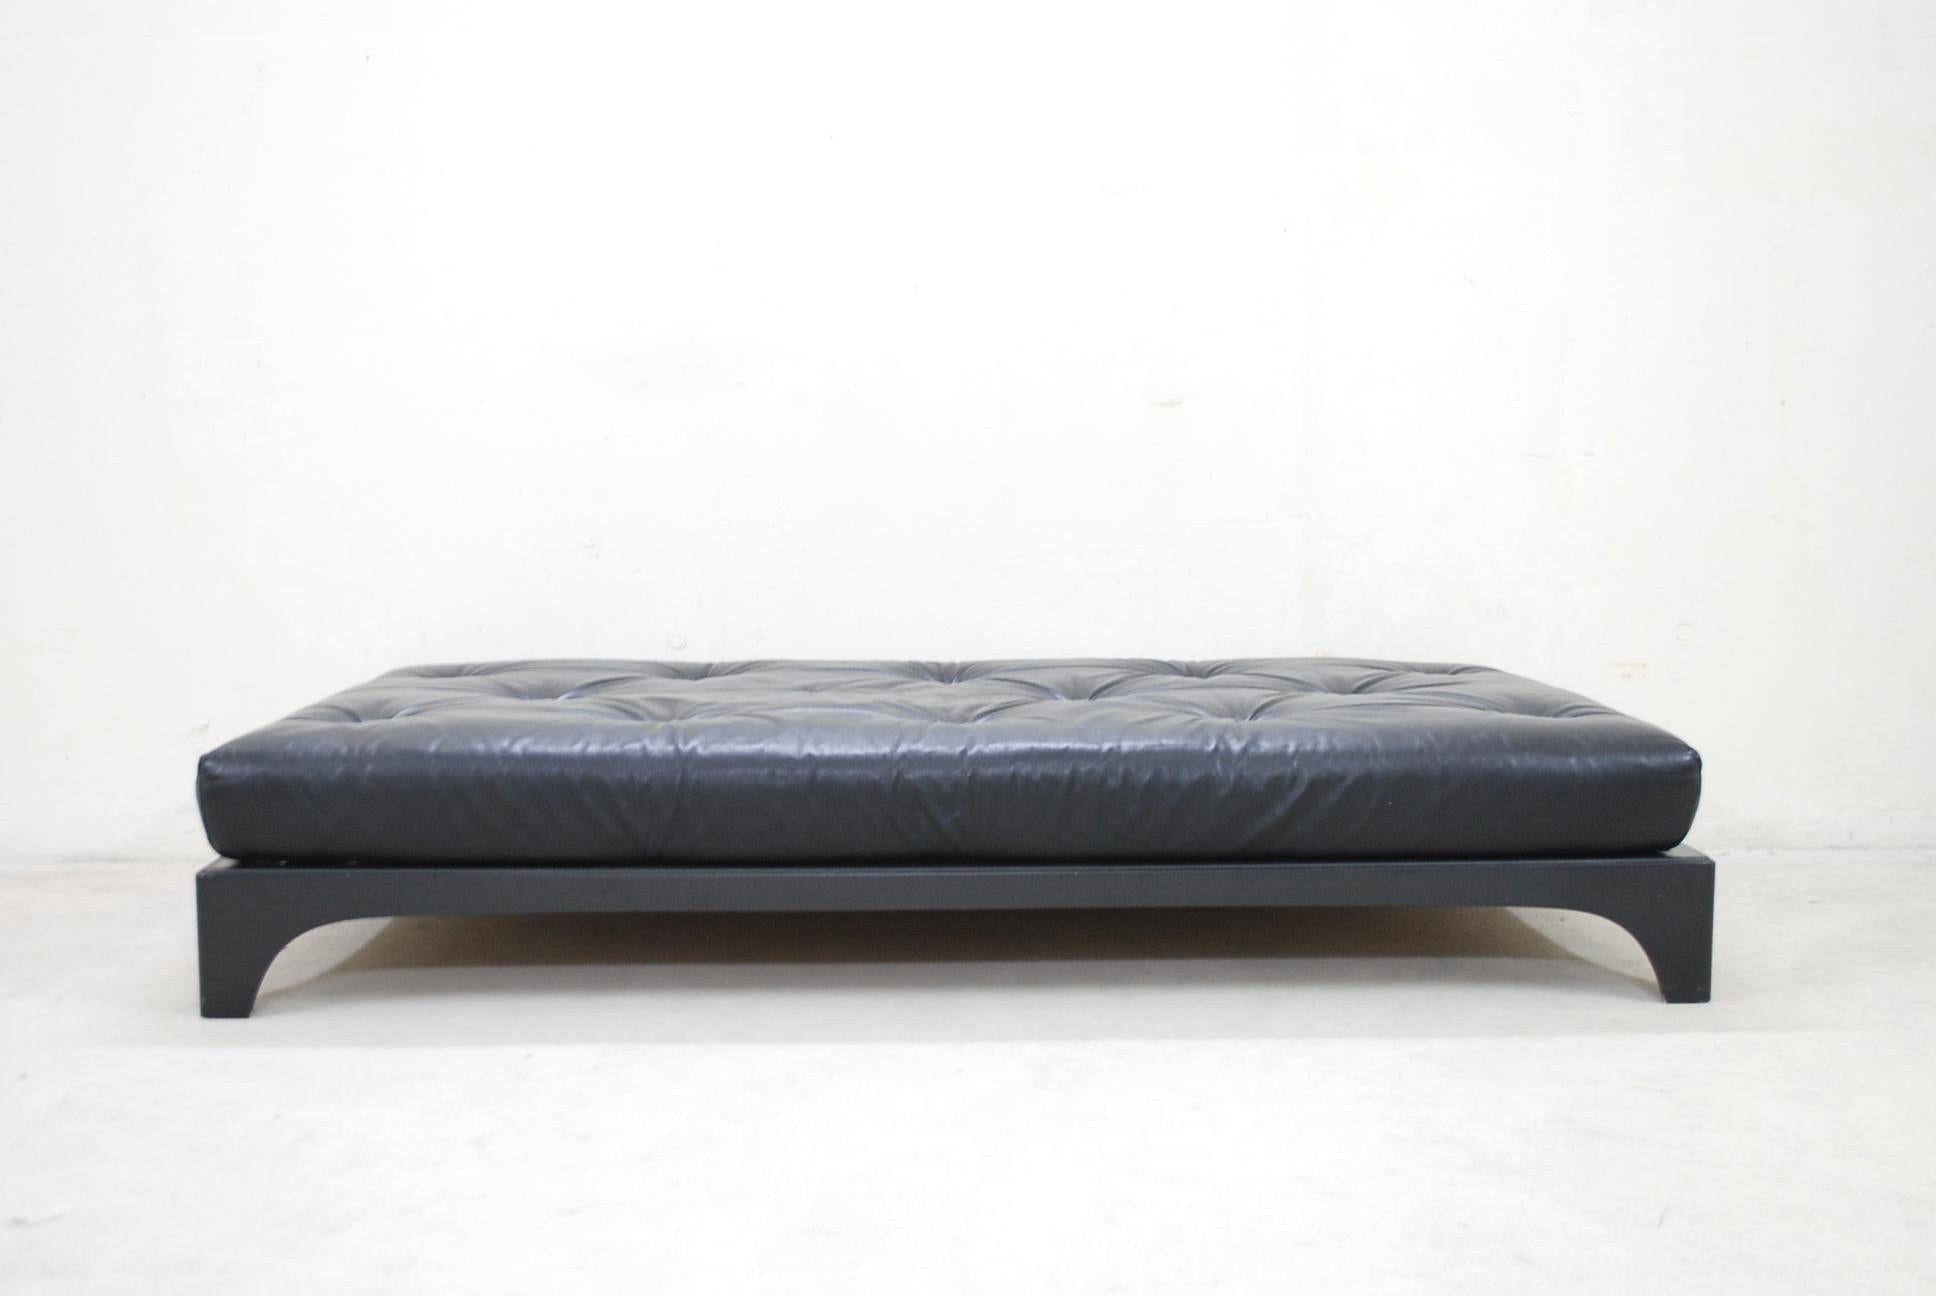 Daybed produced in the 1960s in Germany.
Upholstered in black leather with heavy latex foam
Features a structure in fiberglass and beech.